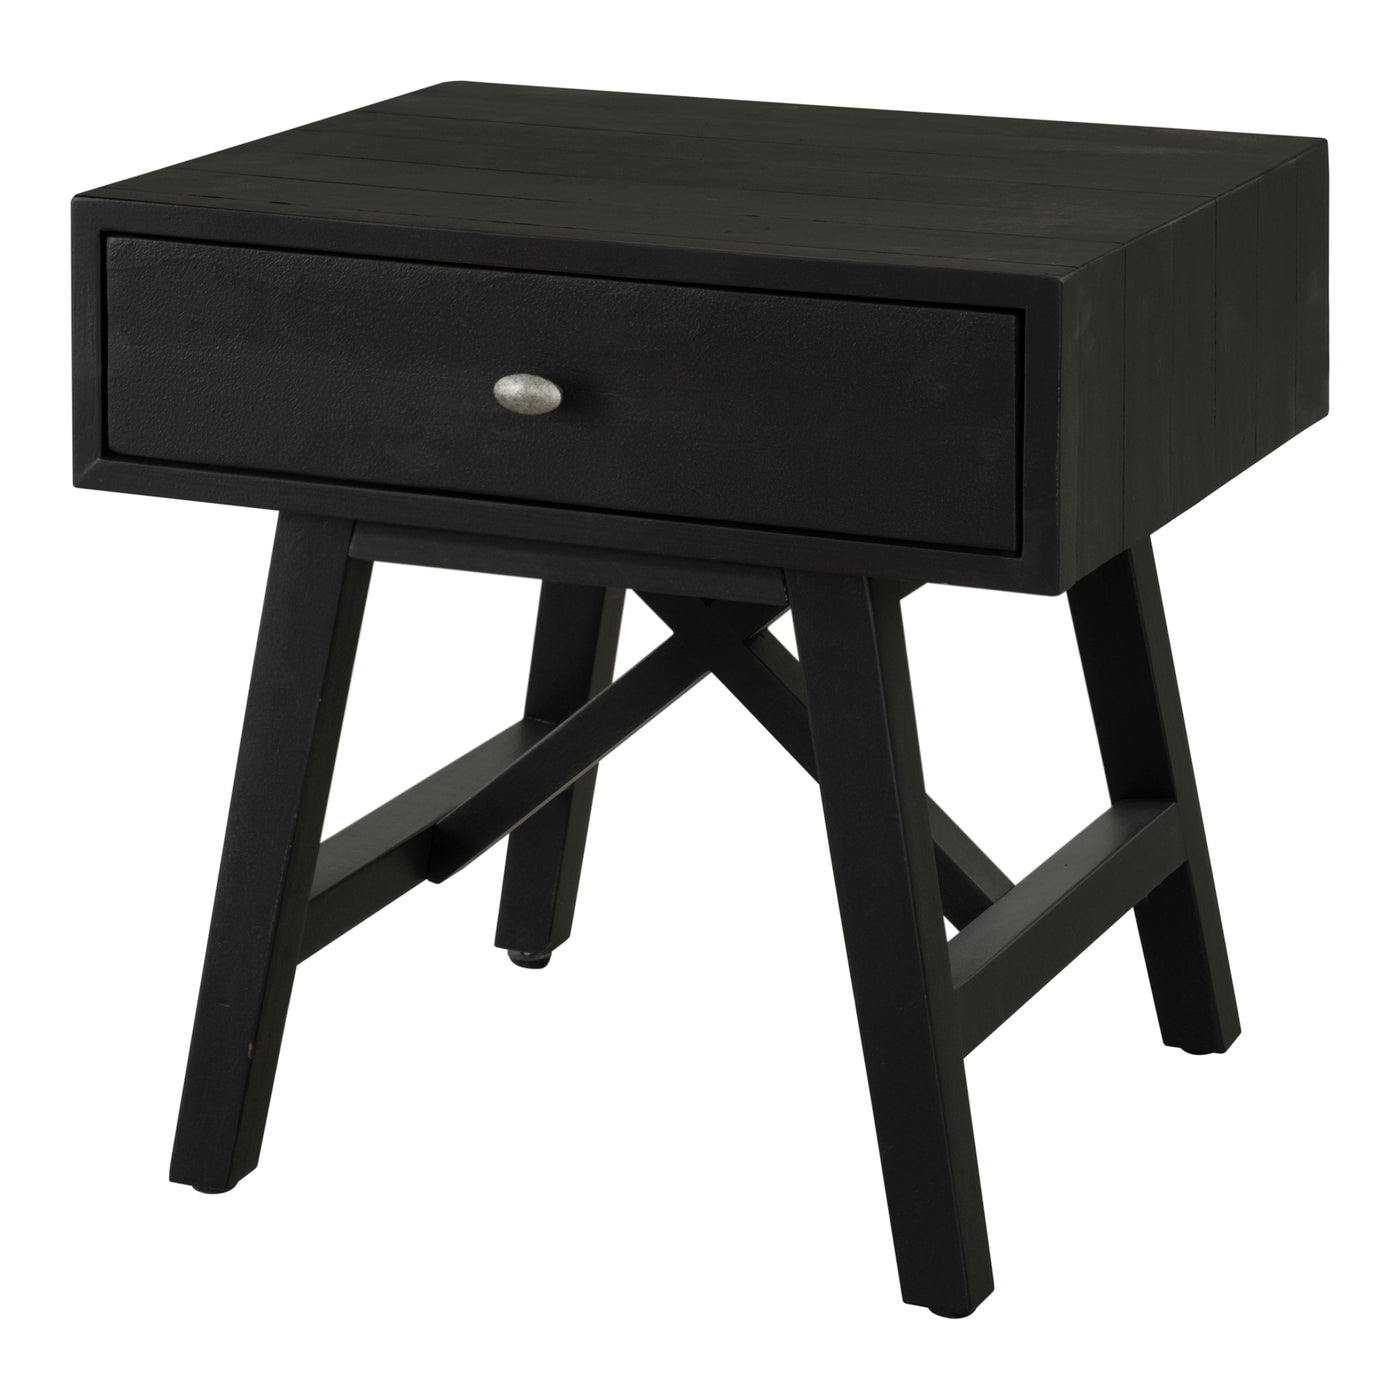 A design that will bring you that much closer to your rustic retreat. The Calais one-drawer nightstand features a sturdy, ...